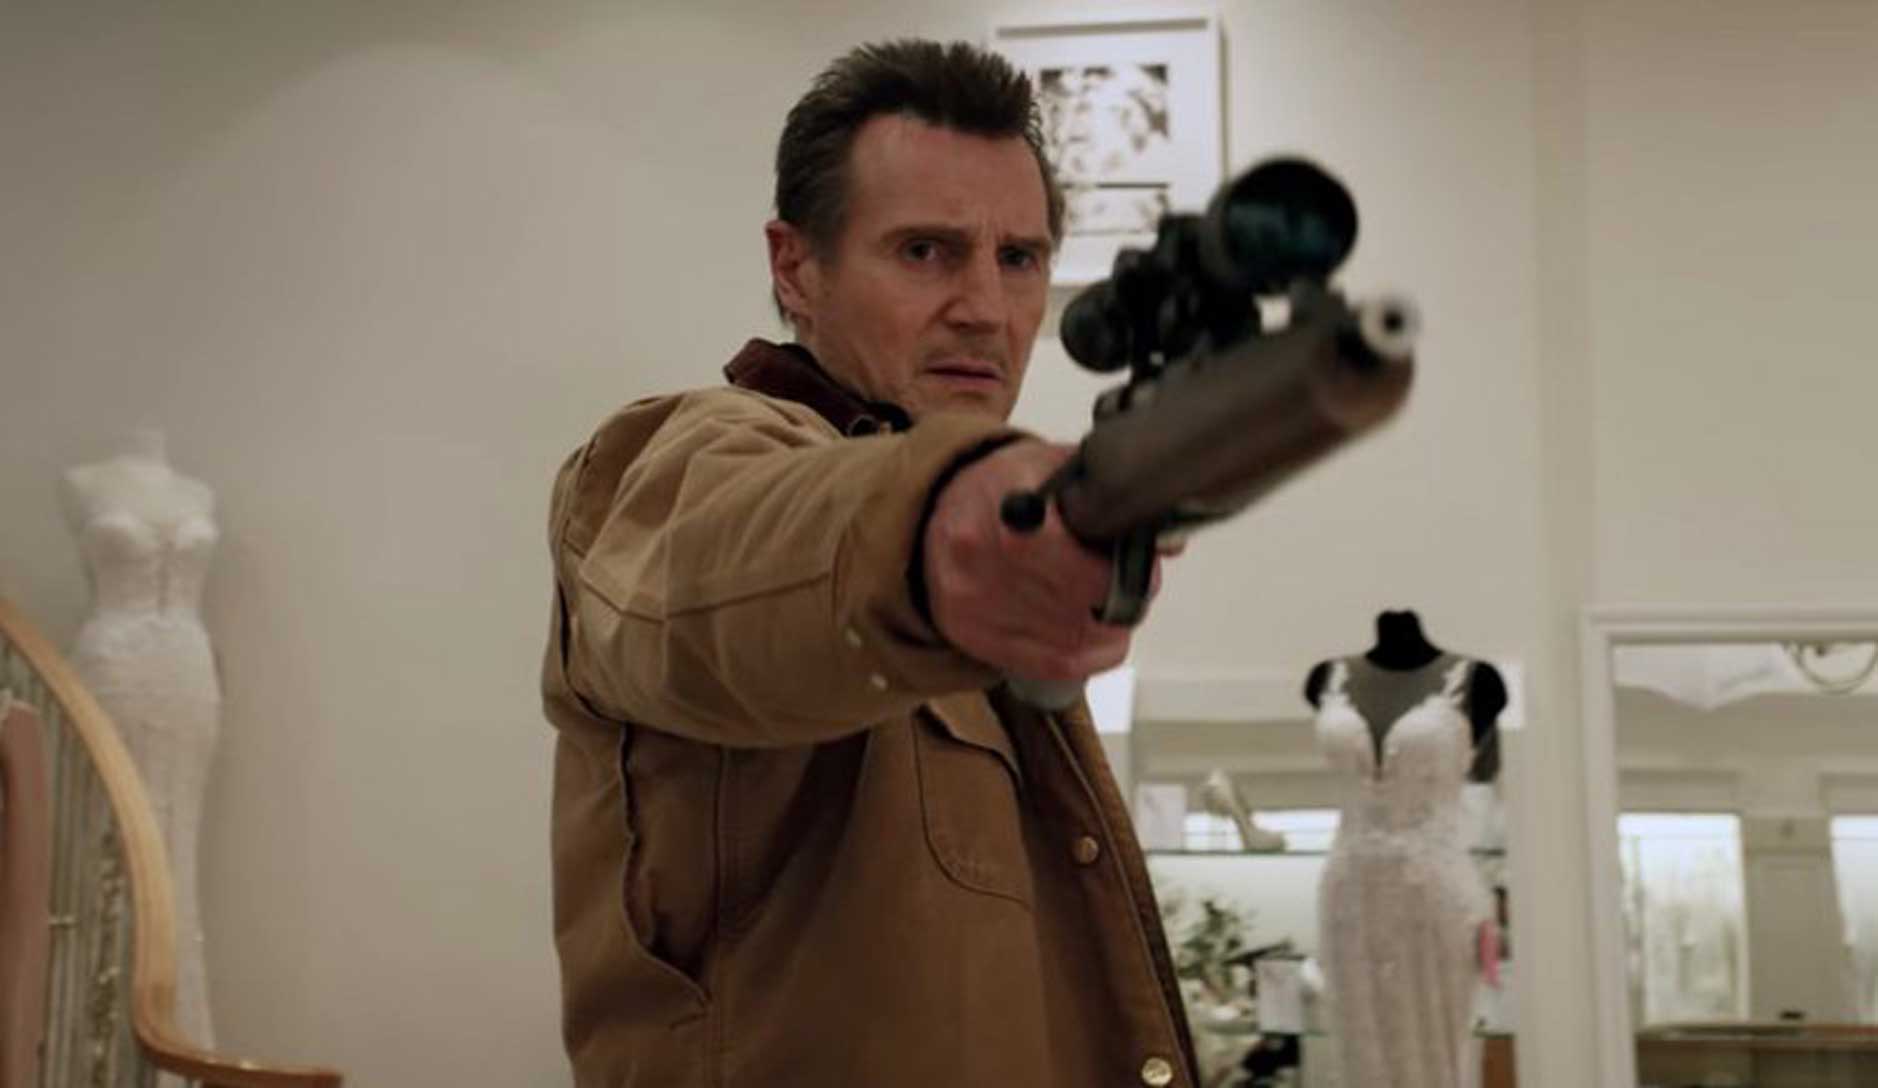 Liam Neeson Is A Revengeful Snowplow Driver In The First Trailer For 'Cold Pursuit'